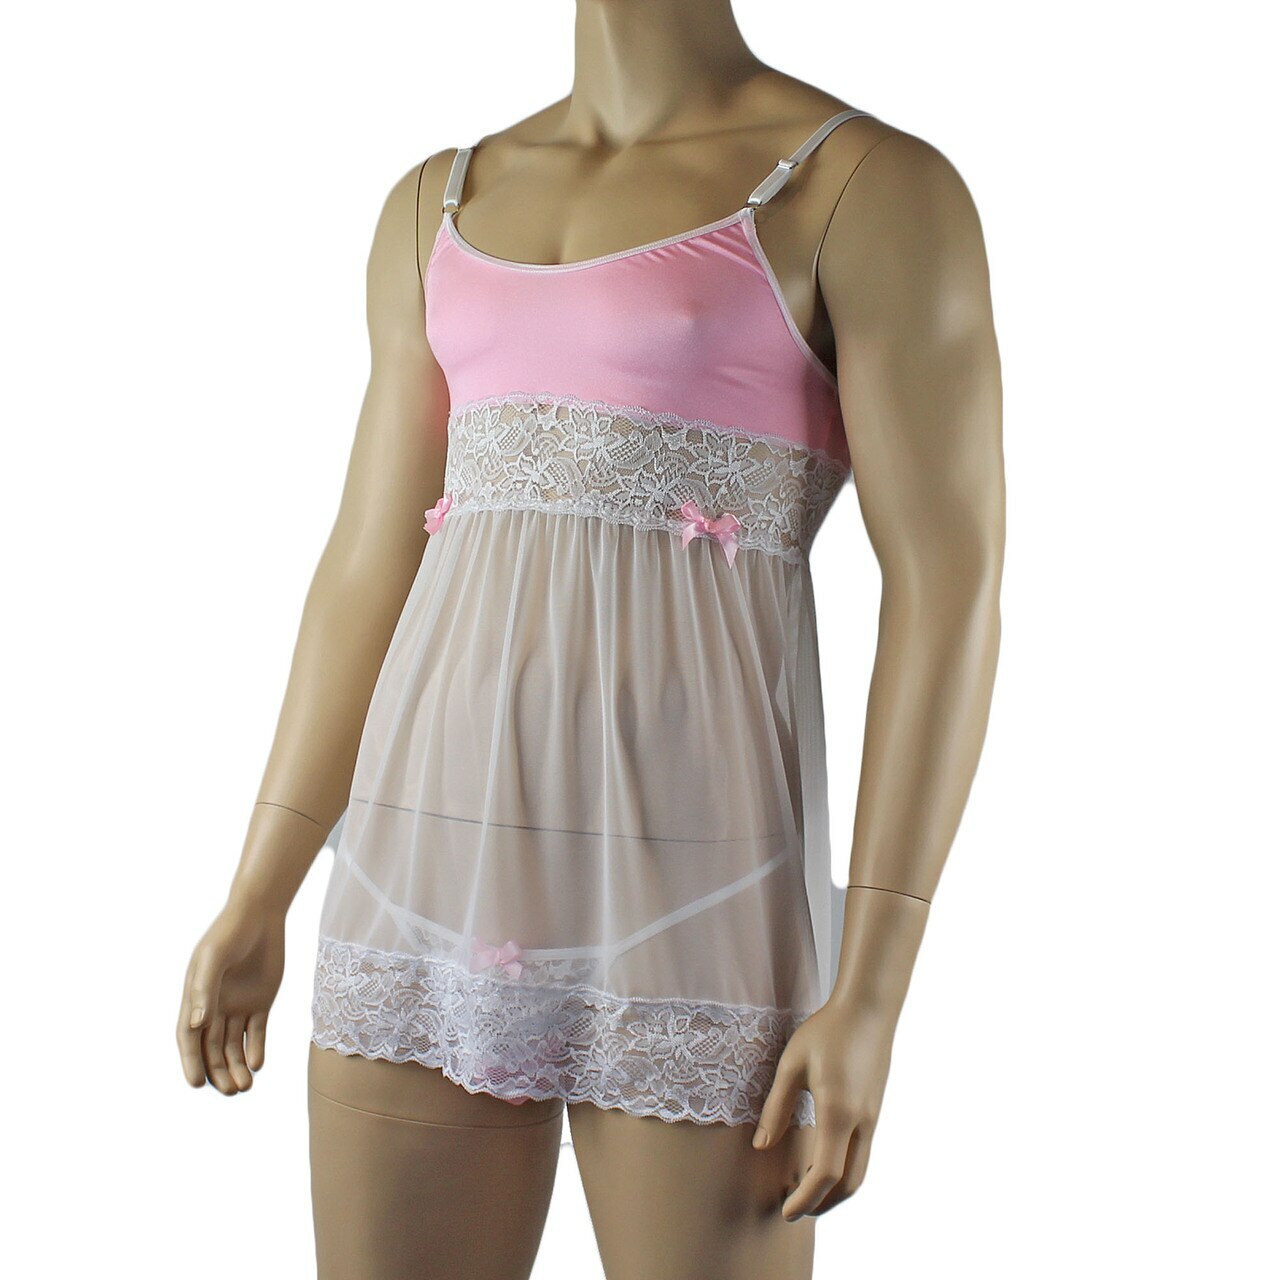 Mens Joanne Sexy Lingerie Babydoll with G string - Sizes up to 3XL (light pink & white plus other colours)